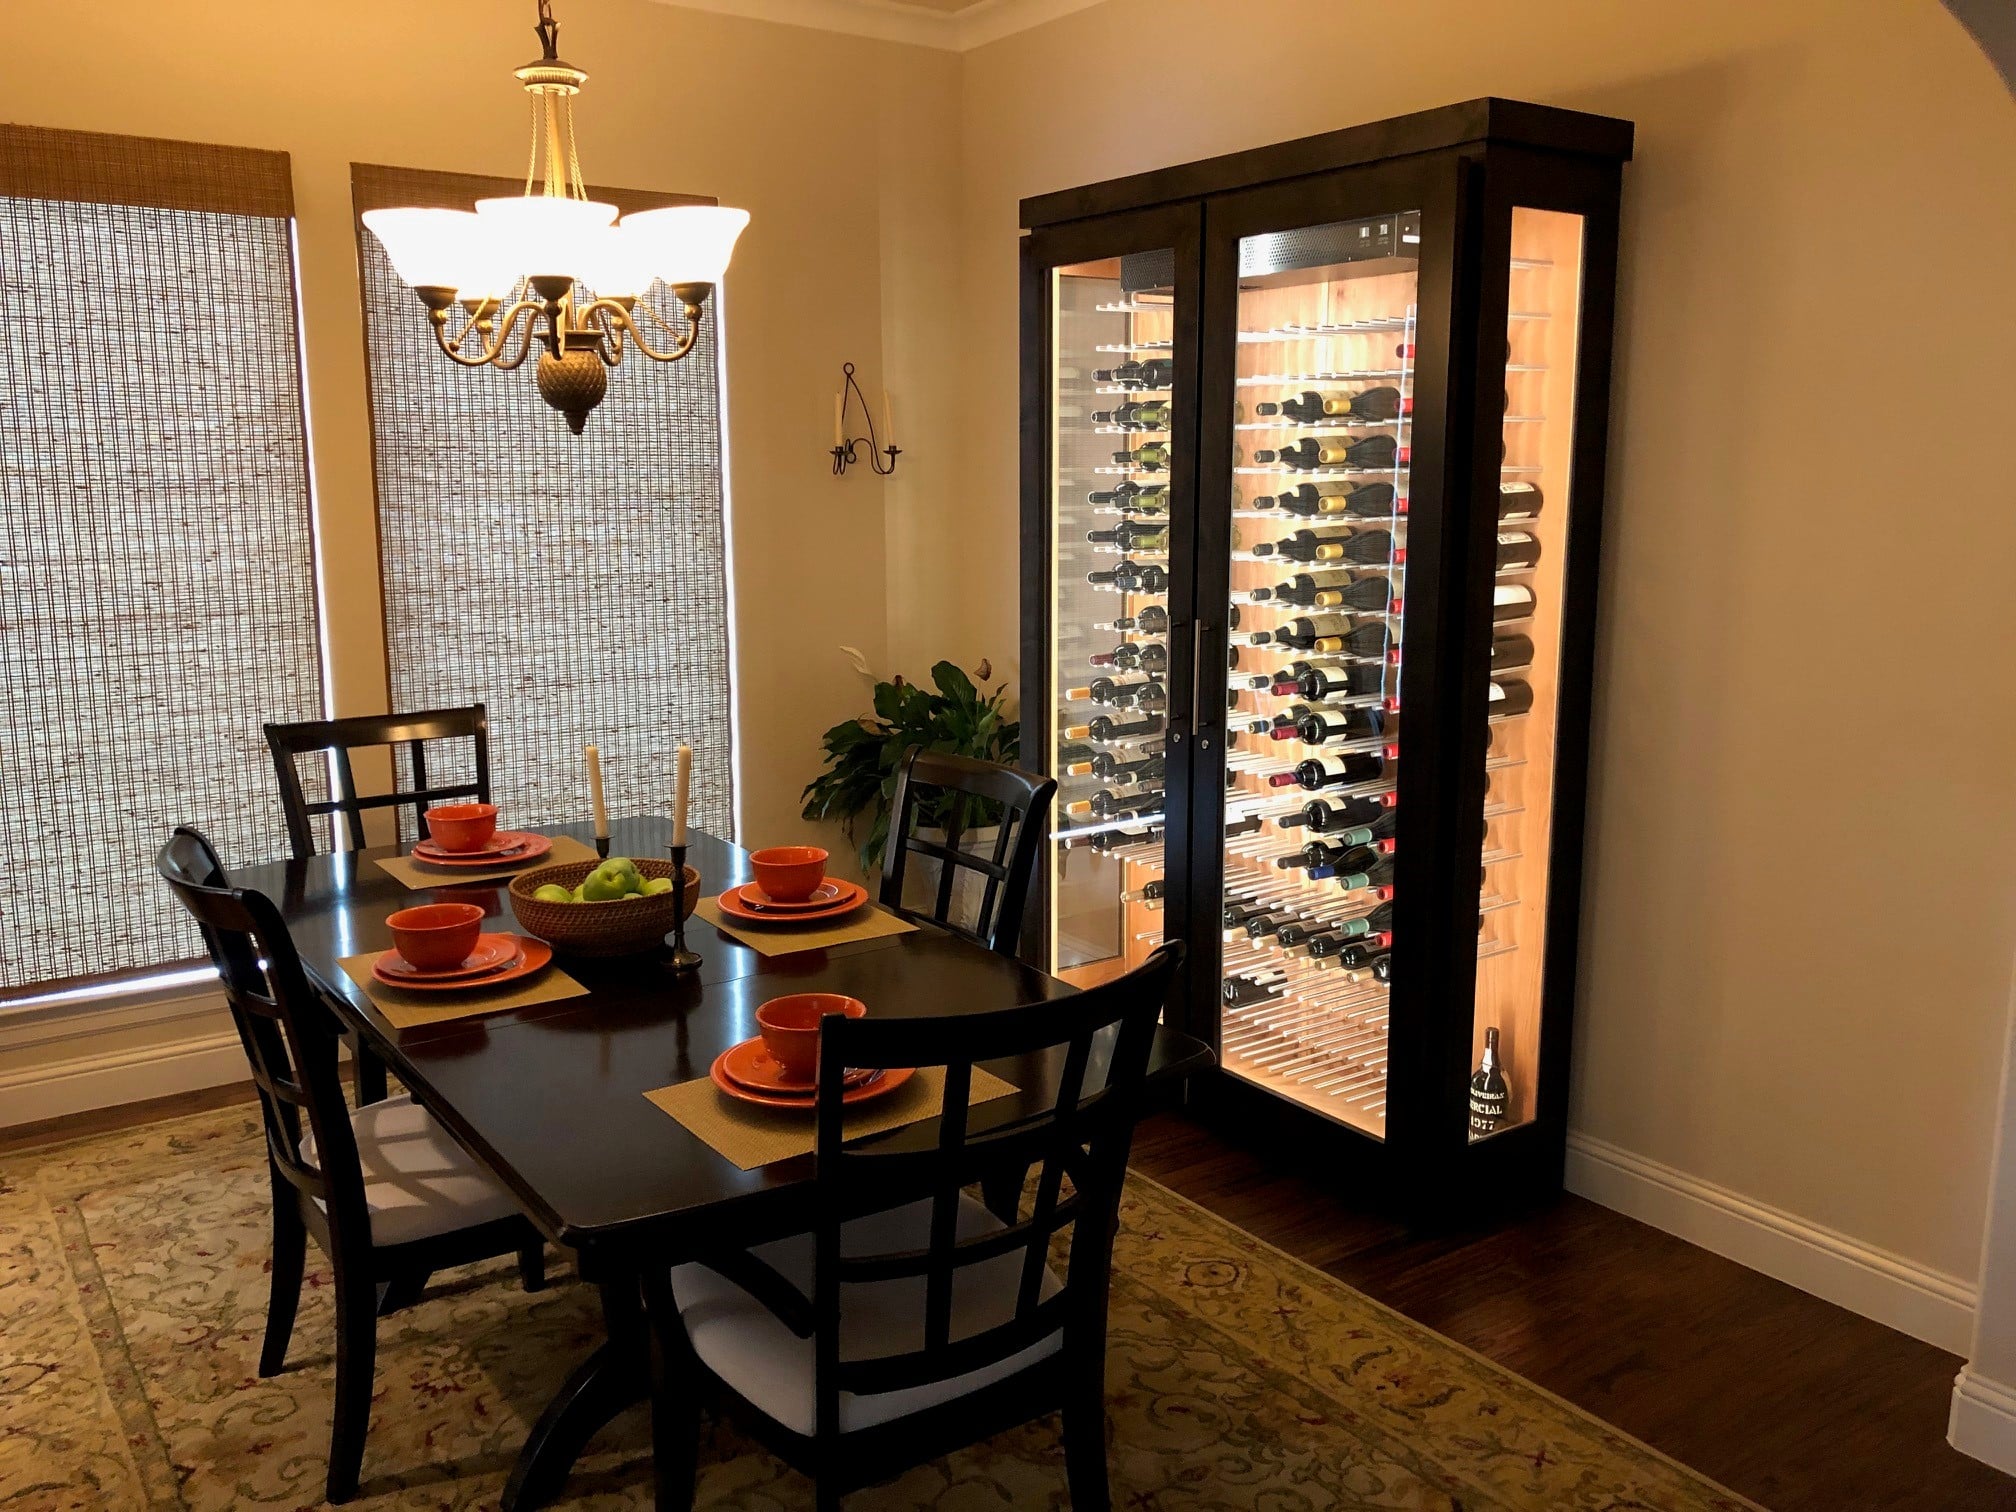 Dining Room Cabinet With Wine Bottle Holders